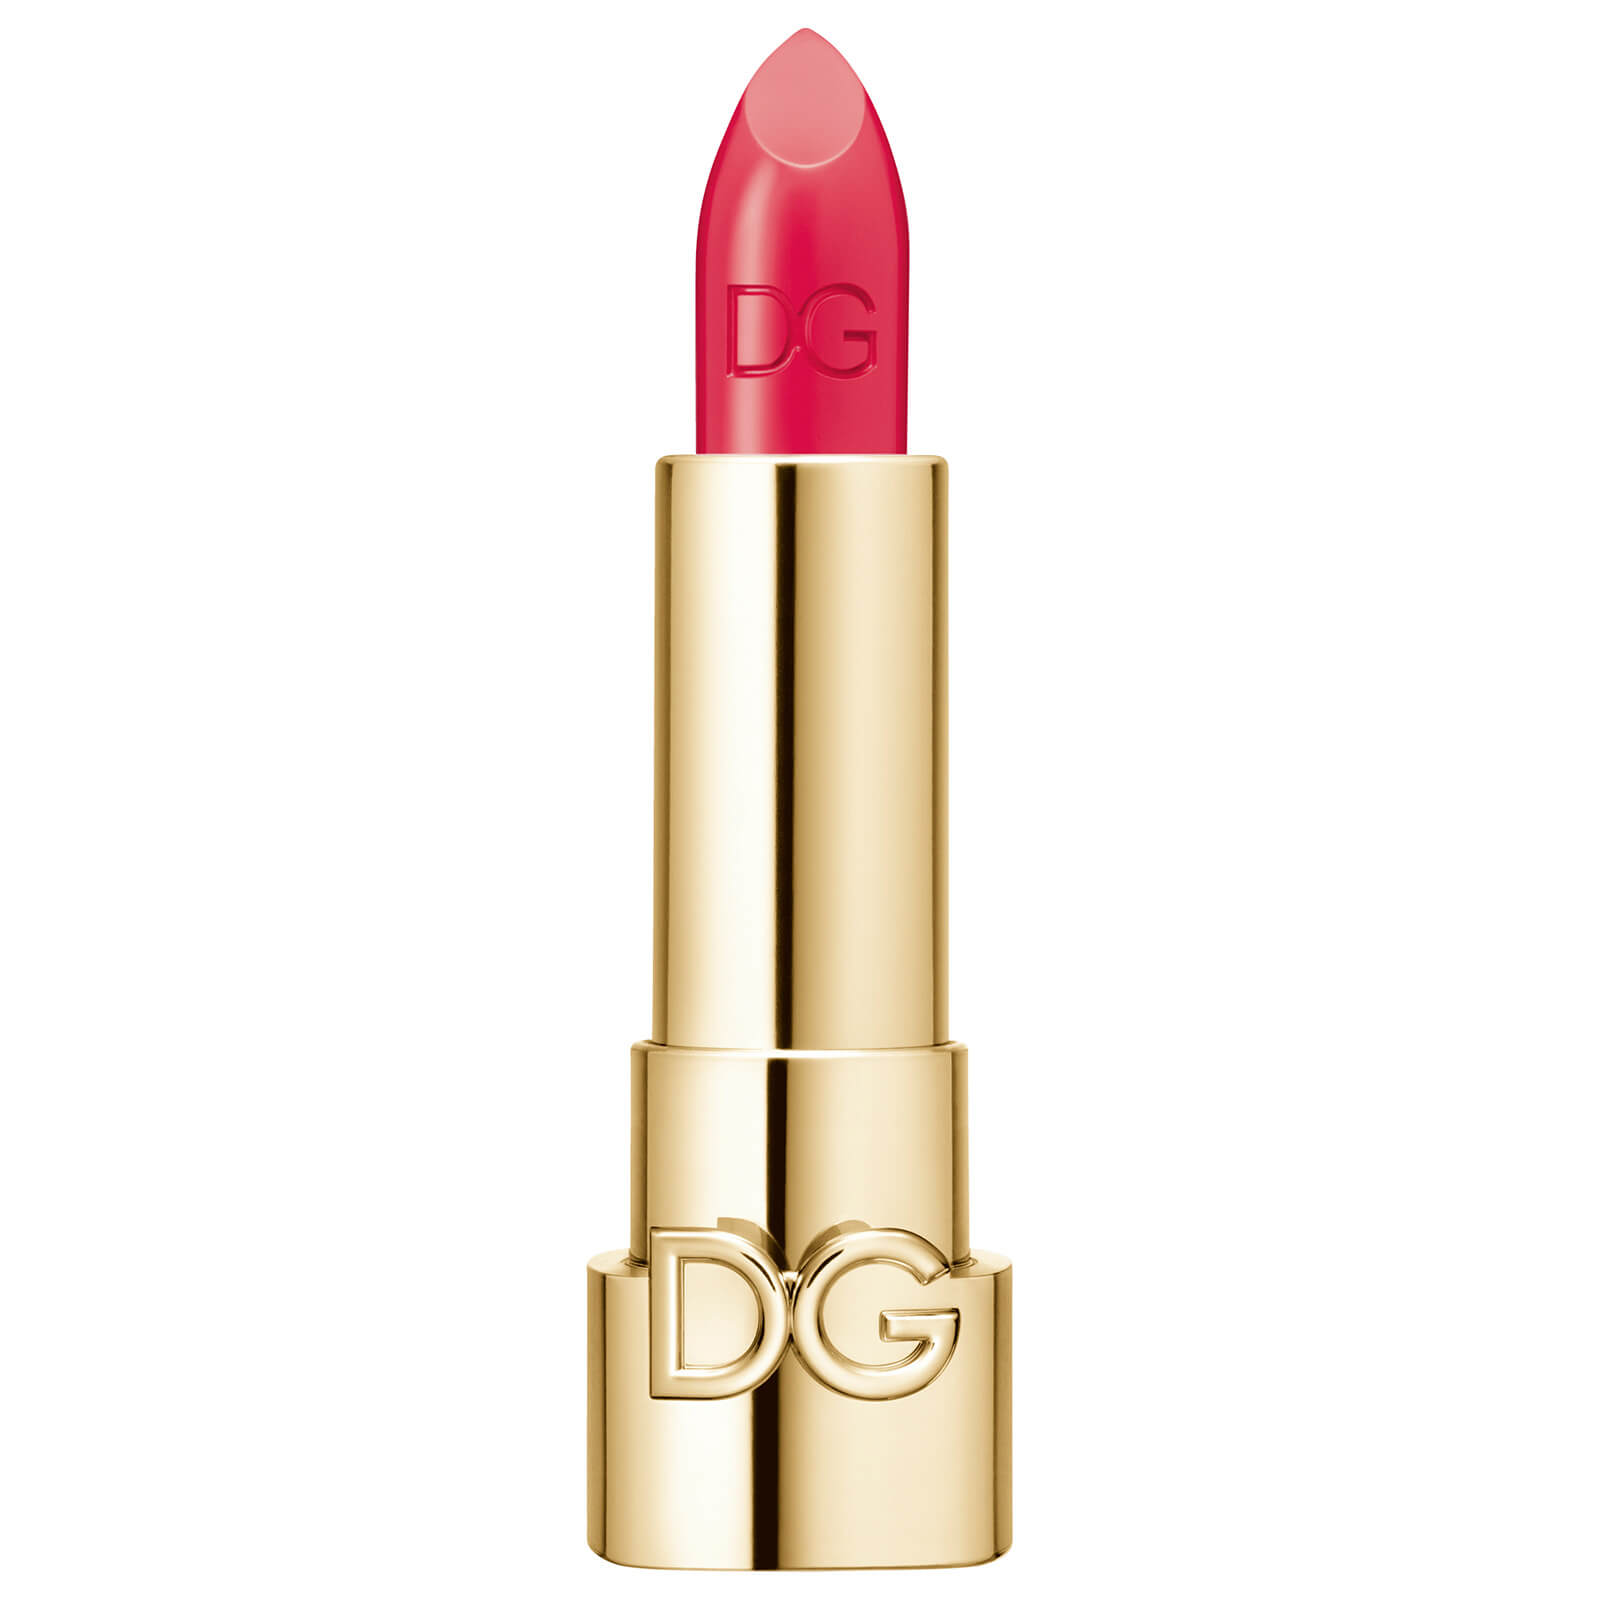 Image of Dolce&Gabbana The Only One Lipstick 1.7g (No Cap) (Various Shades) - 260 Pink Lady